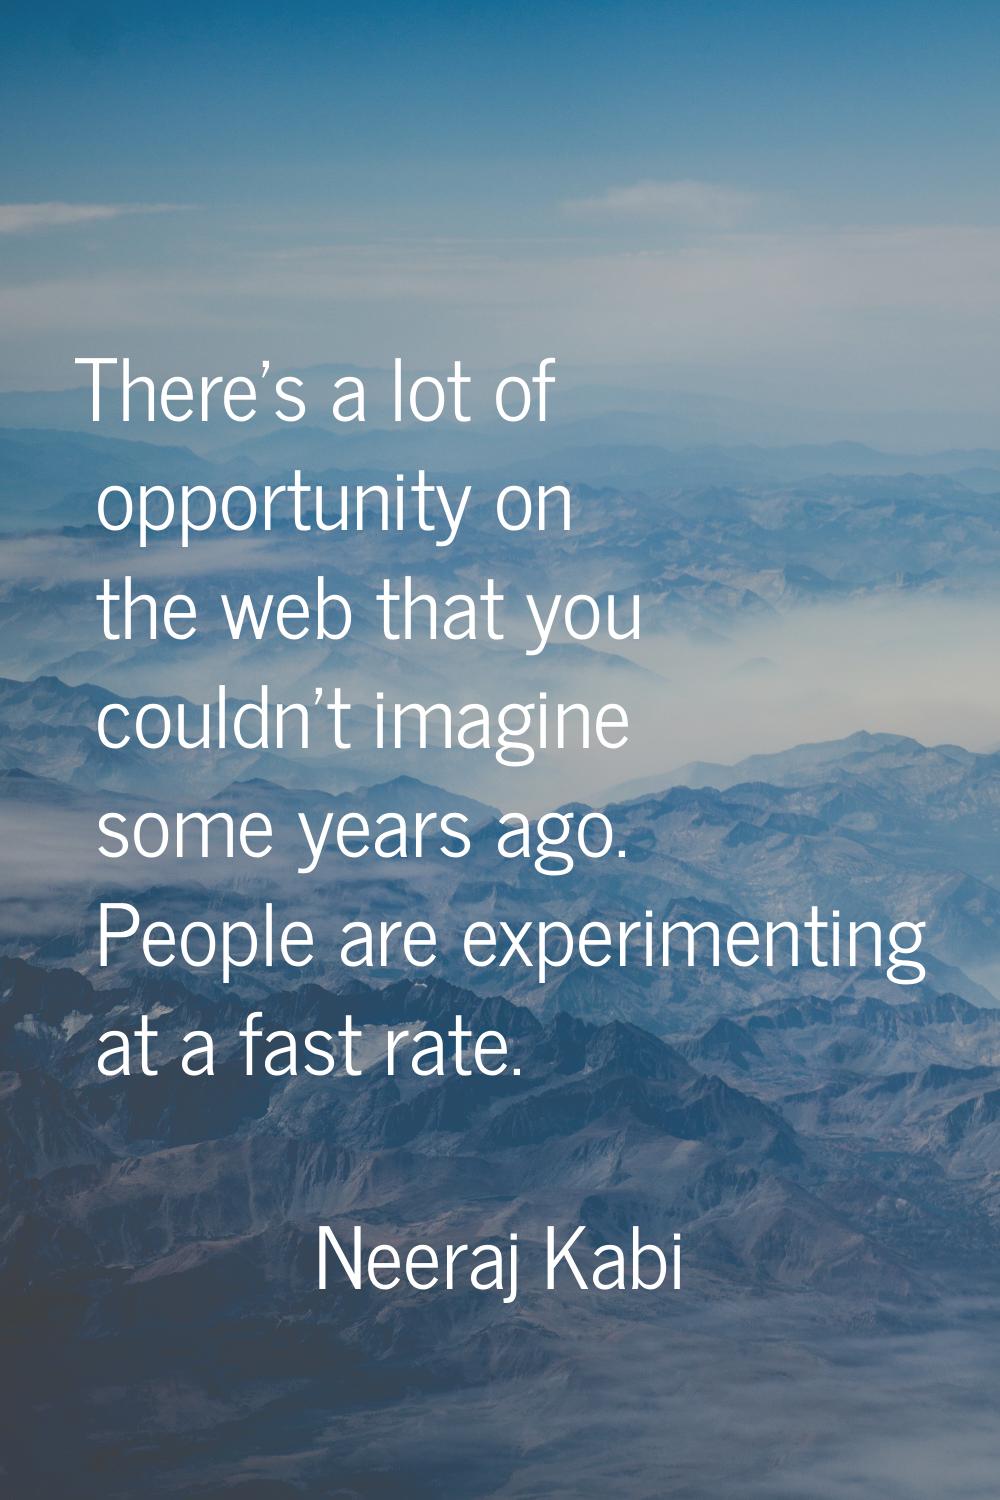 There's a lot of opportunity on the web that you couldn't imagine some years ago. People are experi